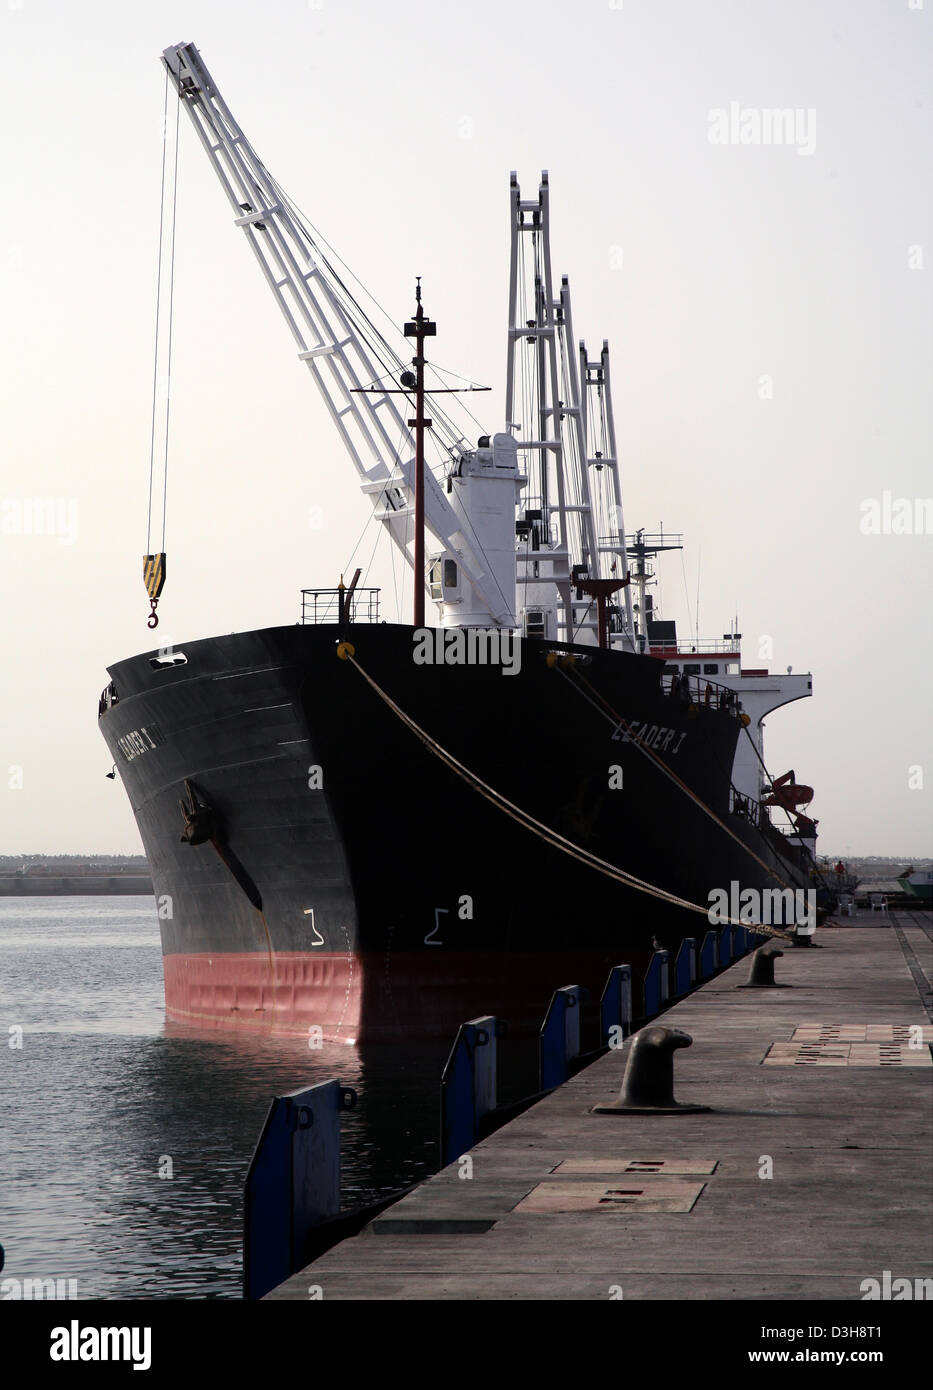 Ship berthed in Sohar industrial port, Sultanate of Oman Stock Photo